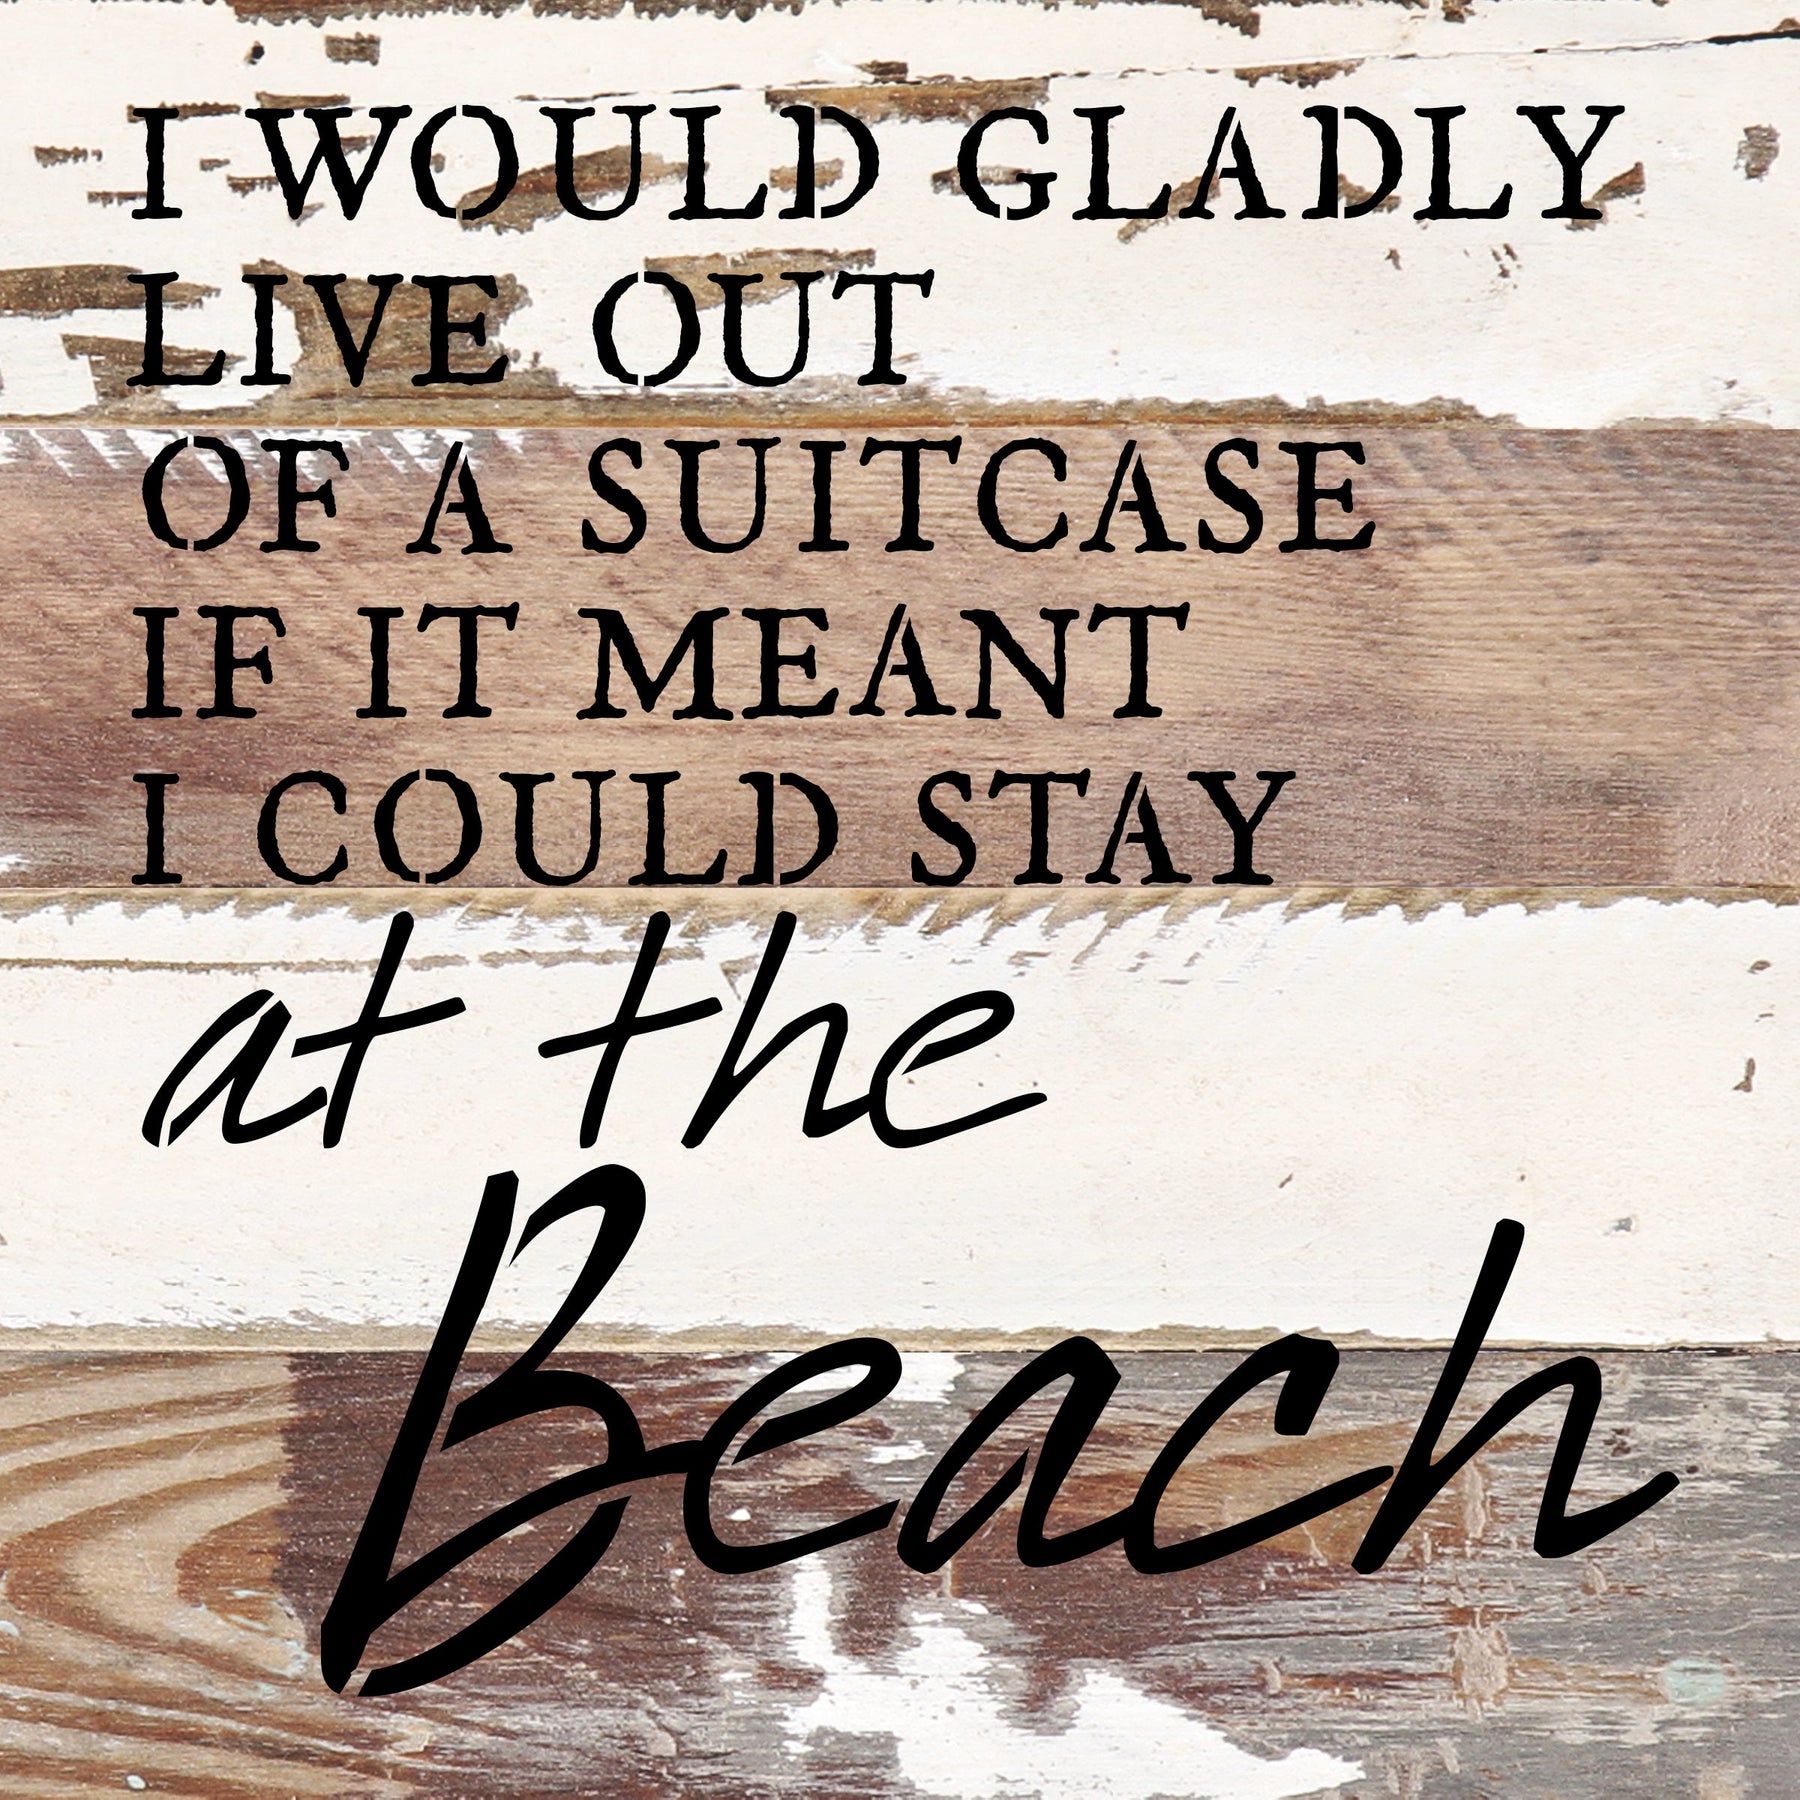 I would gladly live out of a suitcase if it meant I could stay at the beach / 8x8 Reclaimed Wood Wall Art